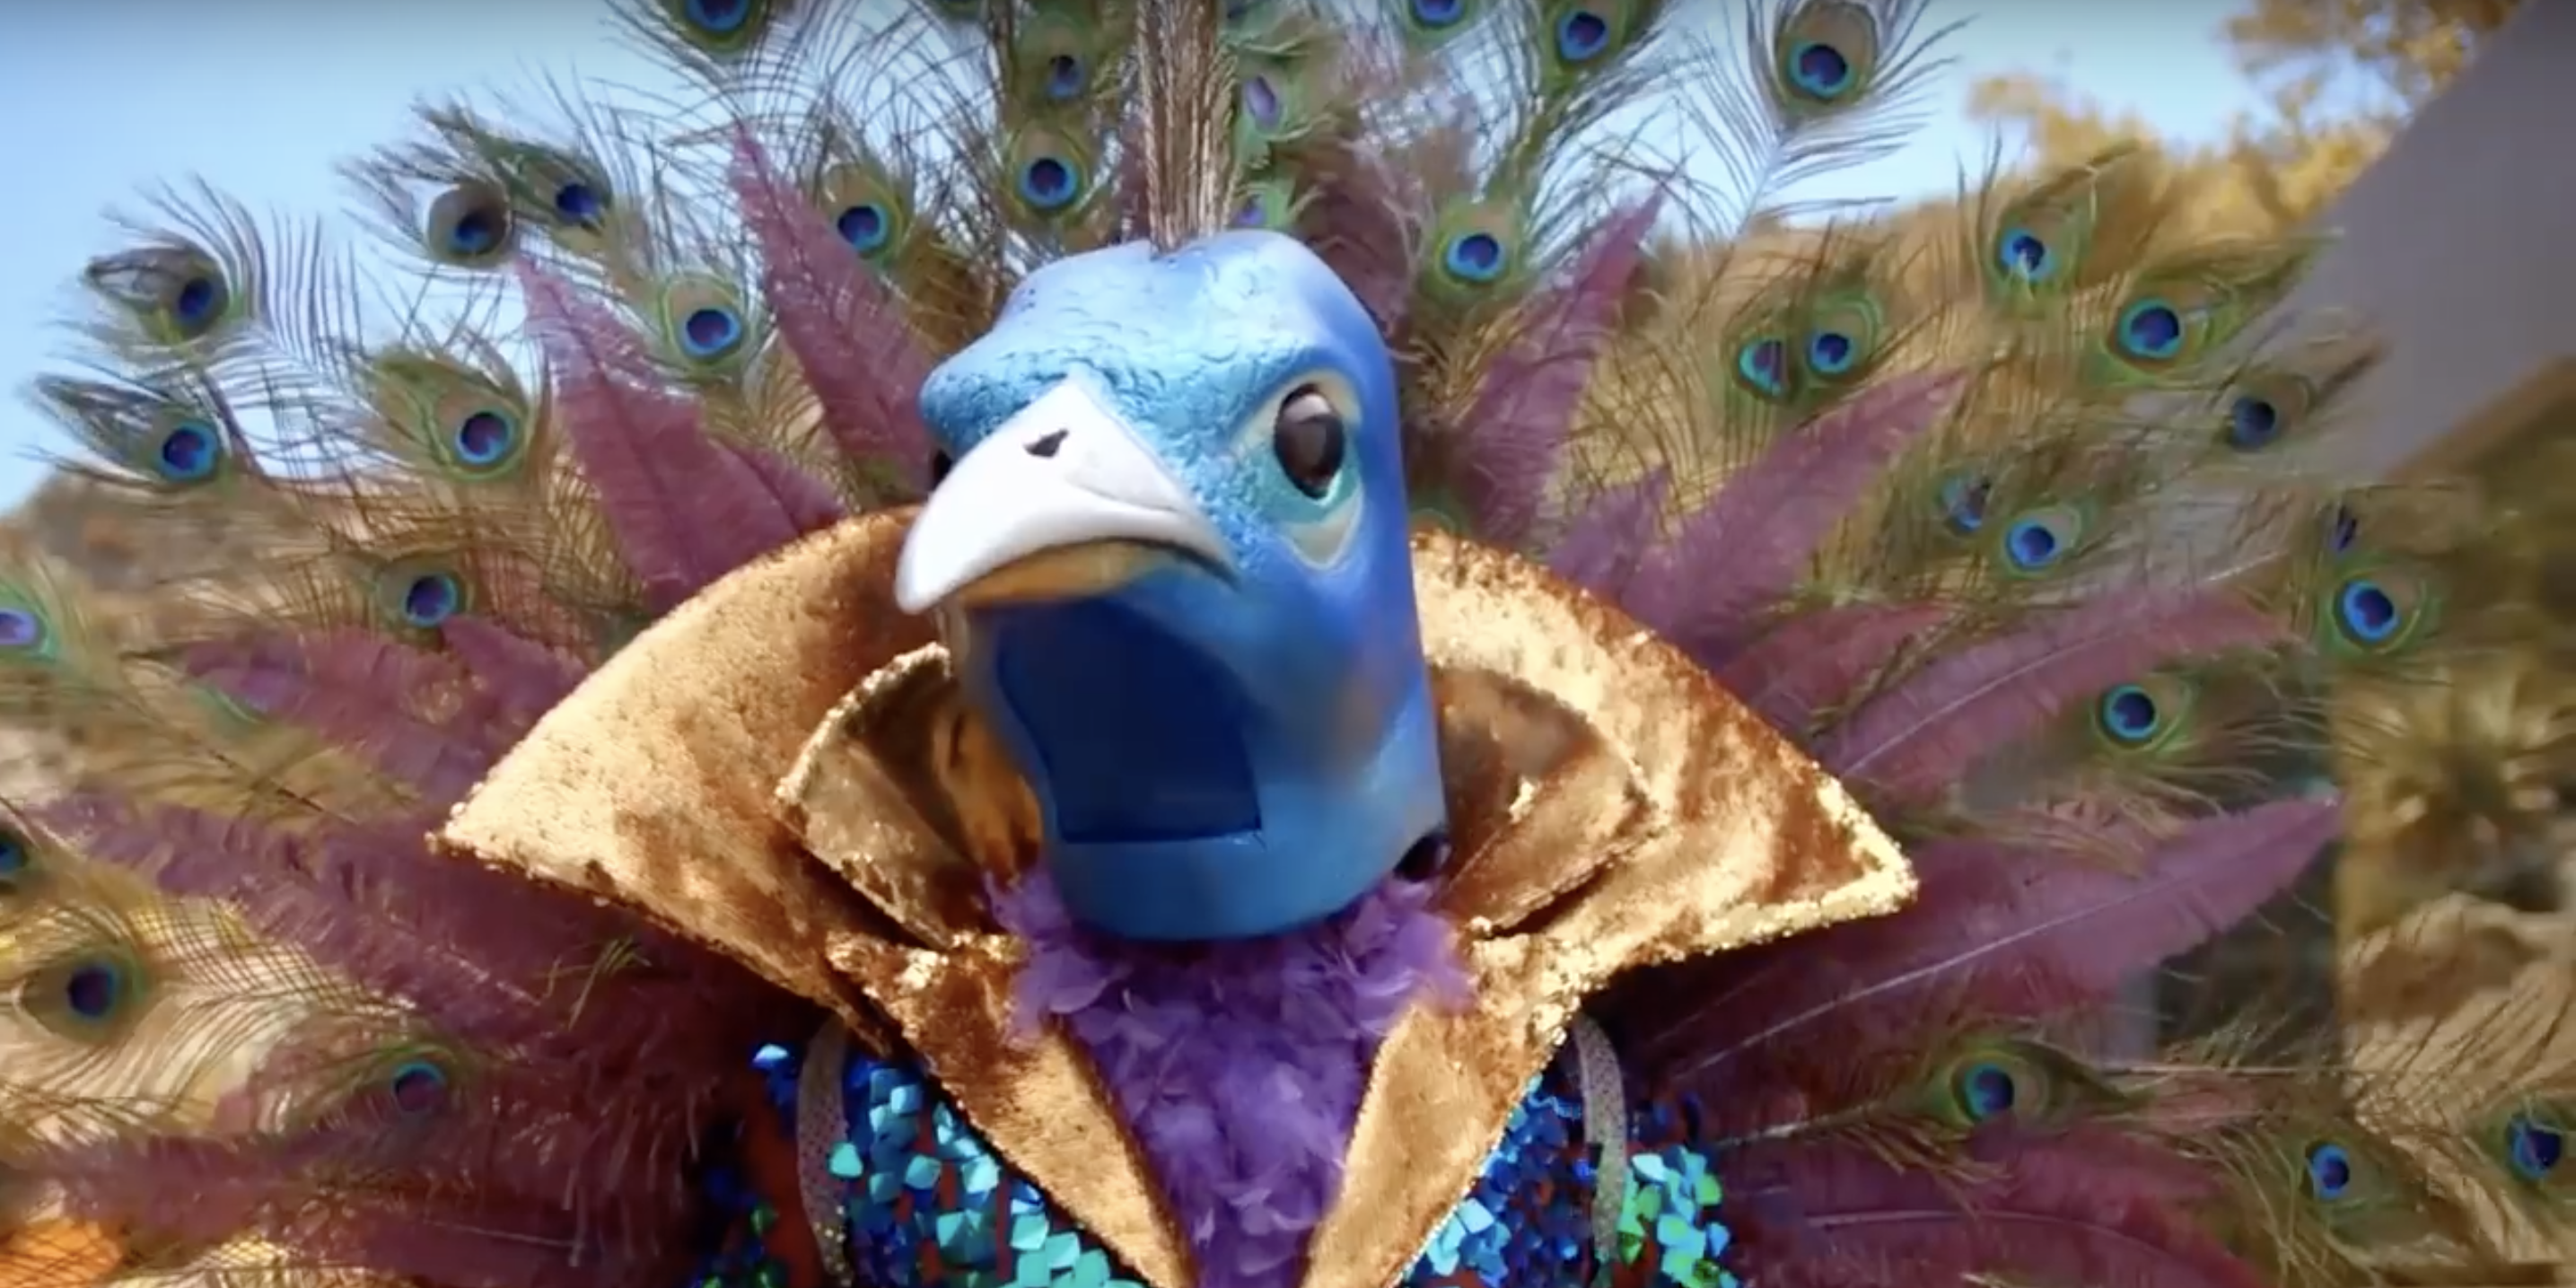 The Masked Singer The Peacock